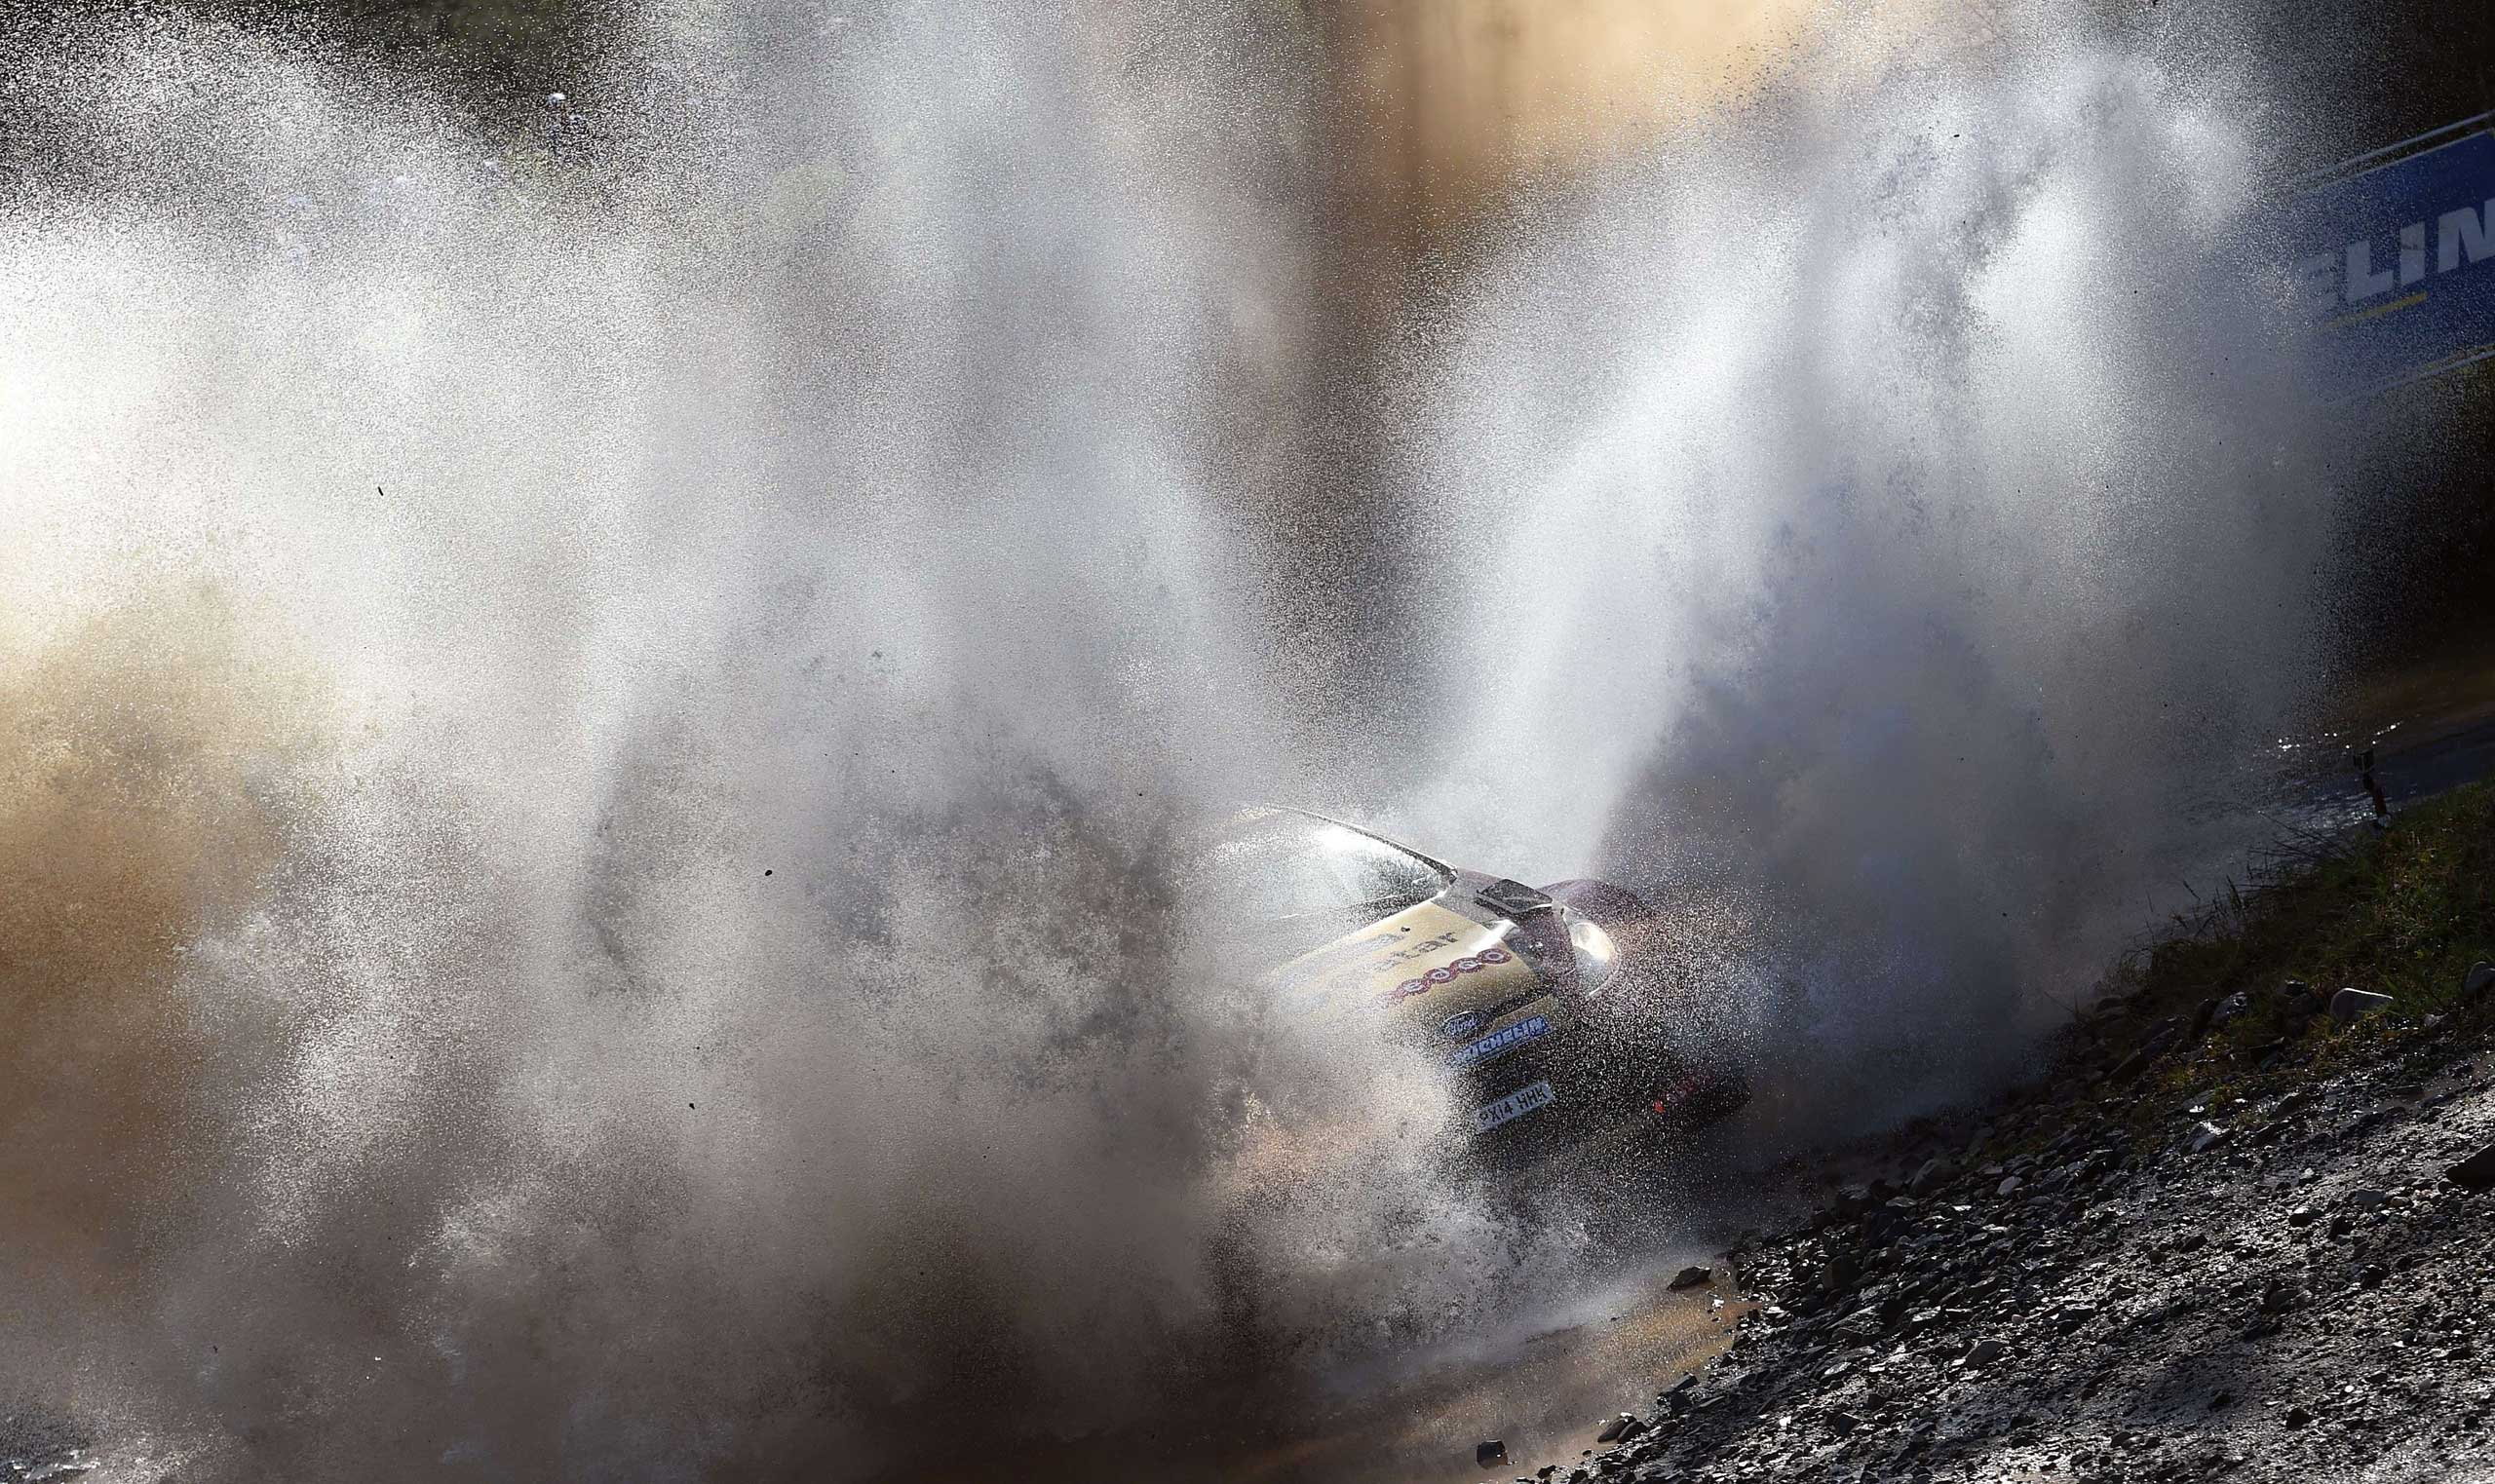 Sept. 14, 2014. Qatar's Nasser al-Attiyah powers through a water crossing in a Ford on the final day of the Rally of Australia, near Lowanna, Australia.